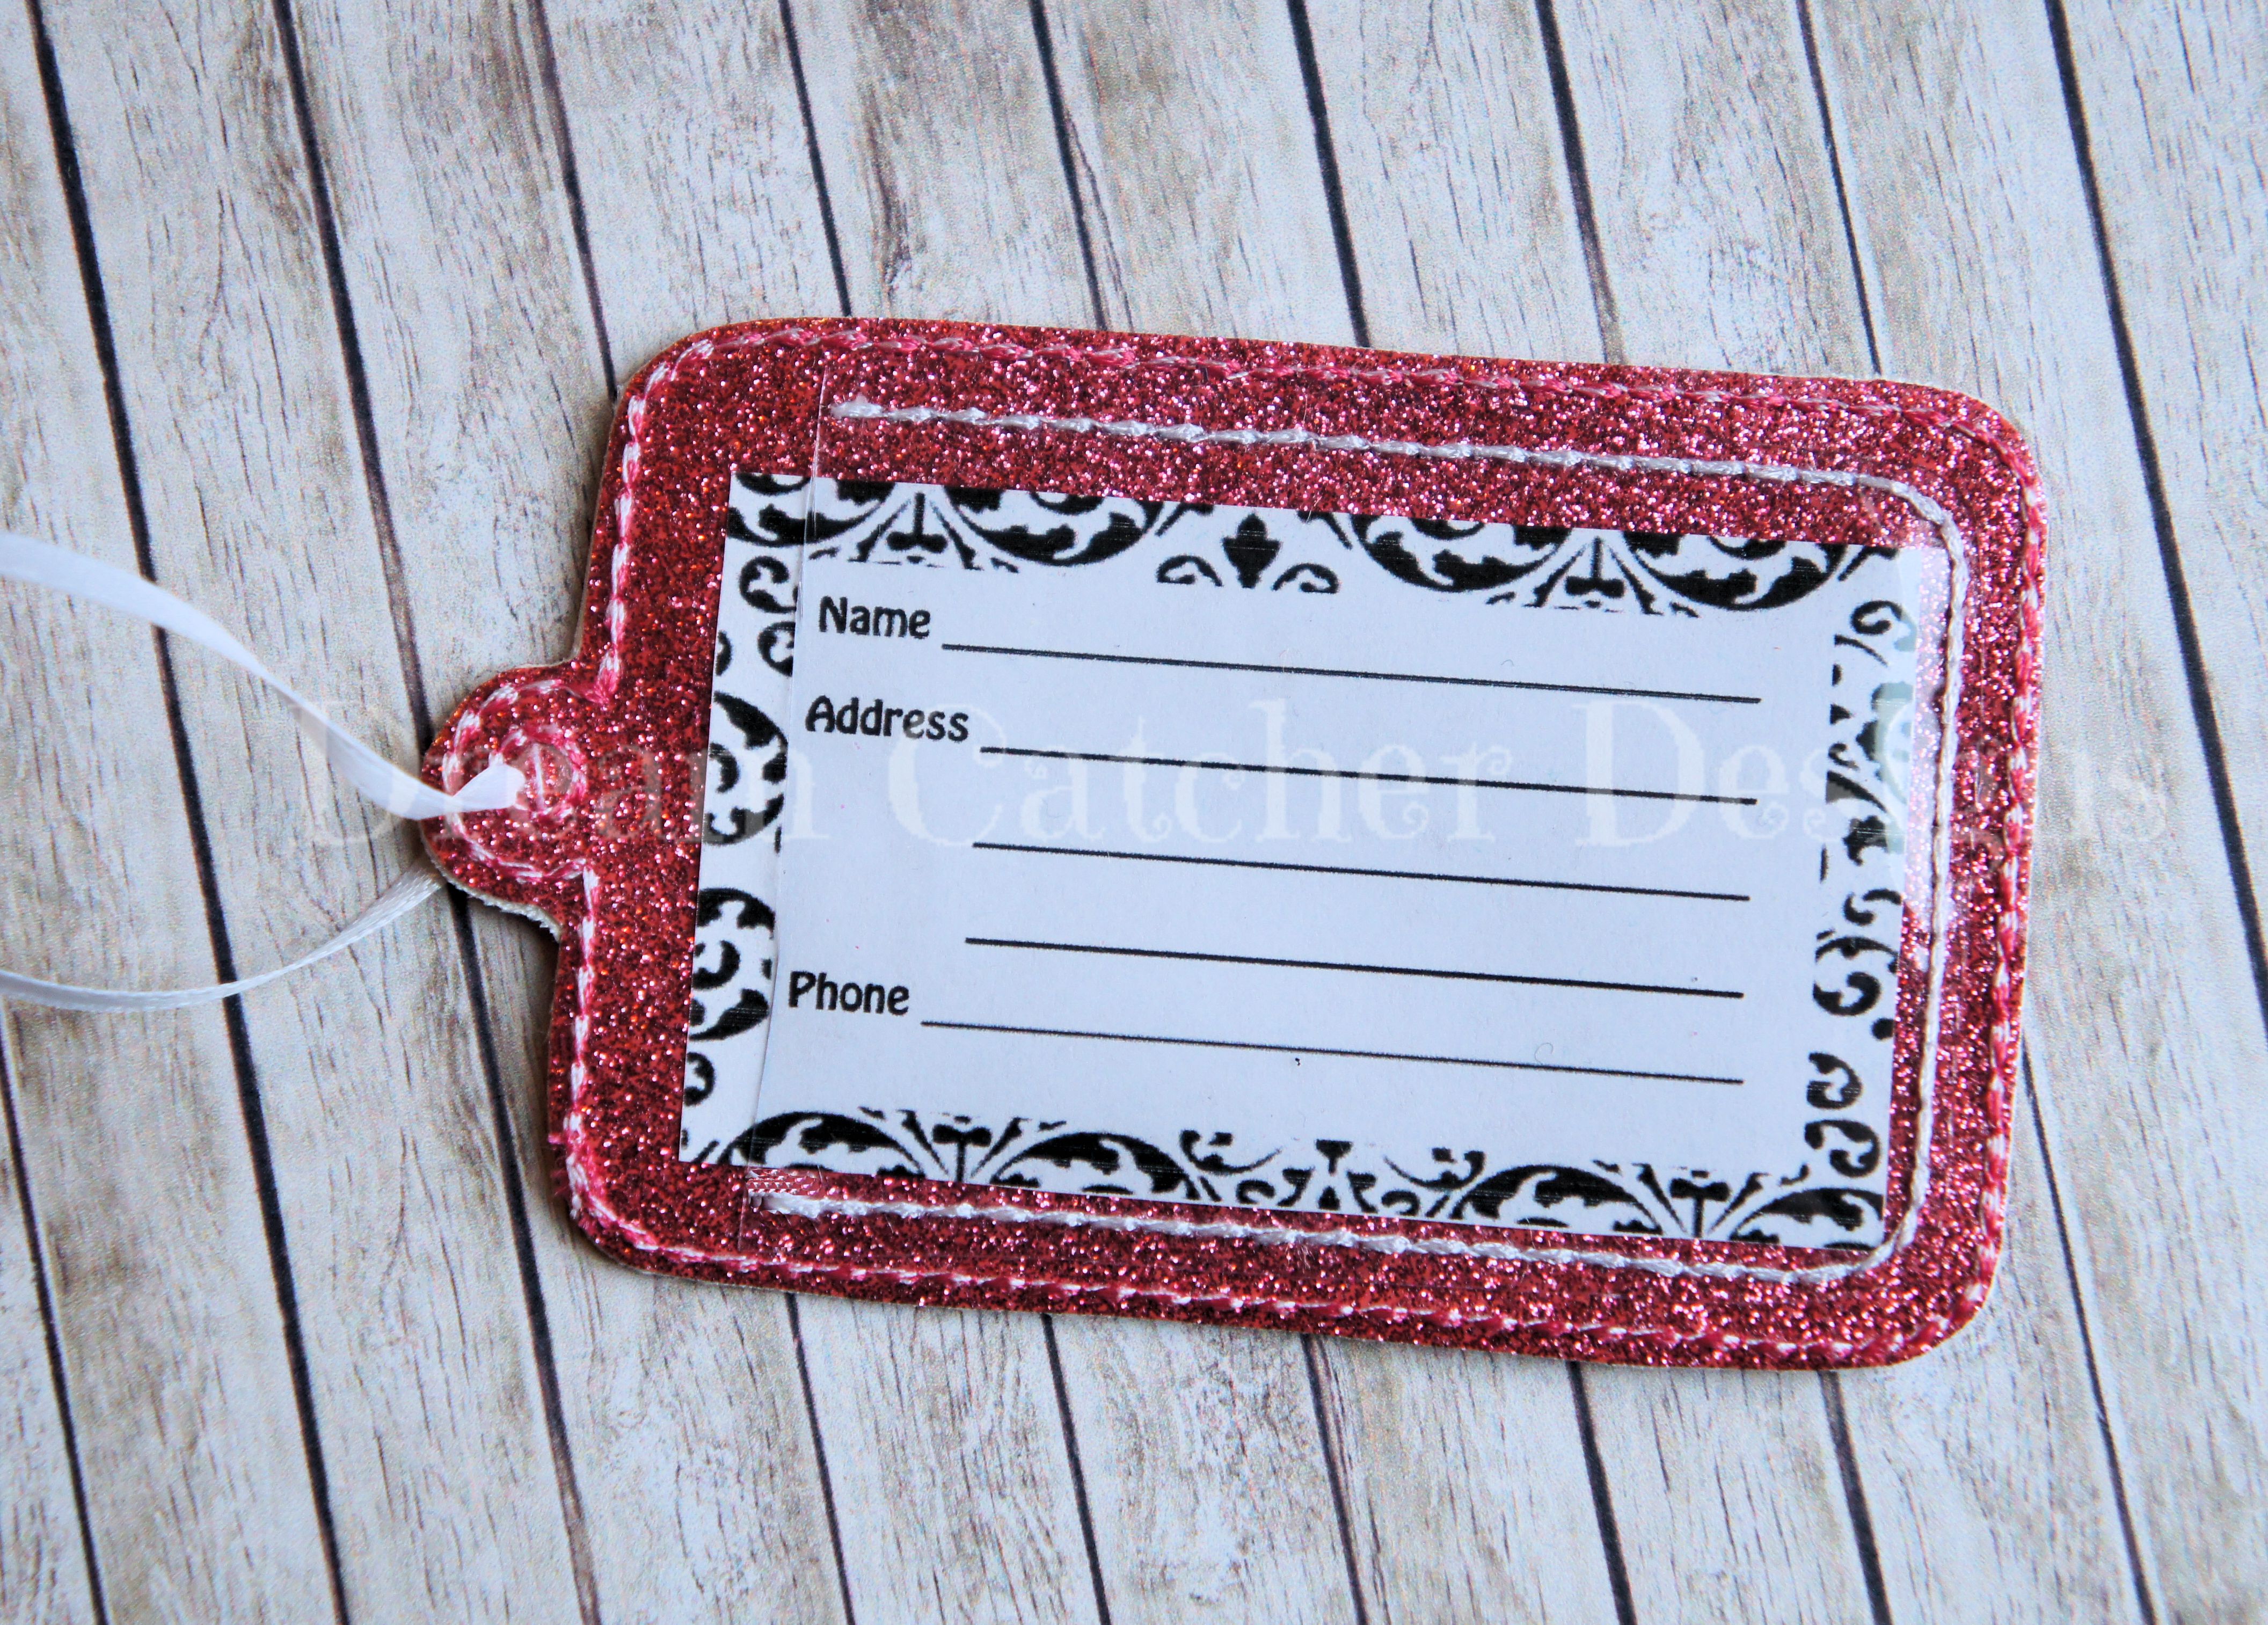 embroidered luggage tags